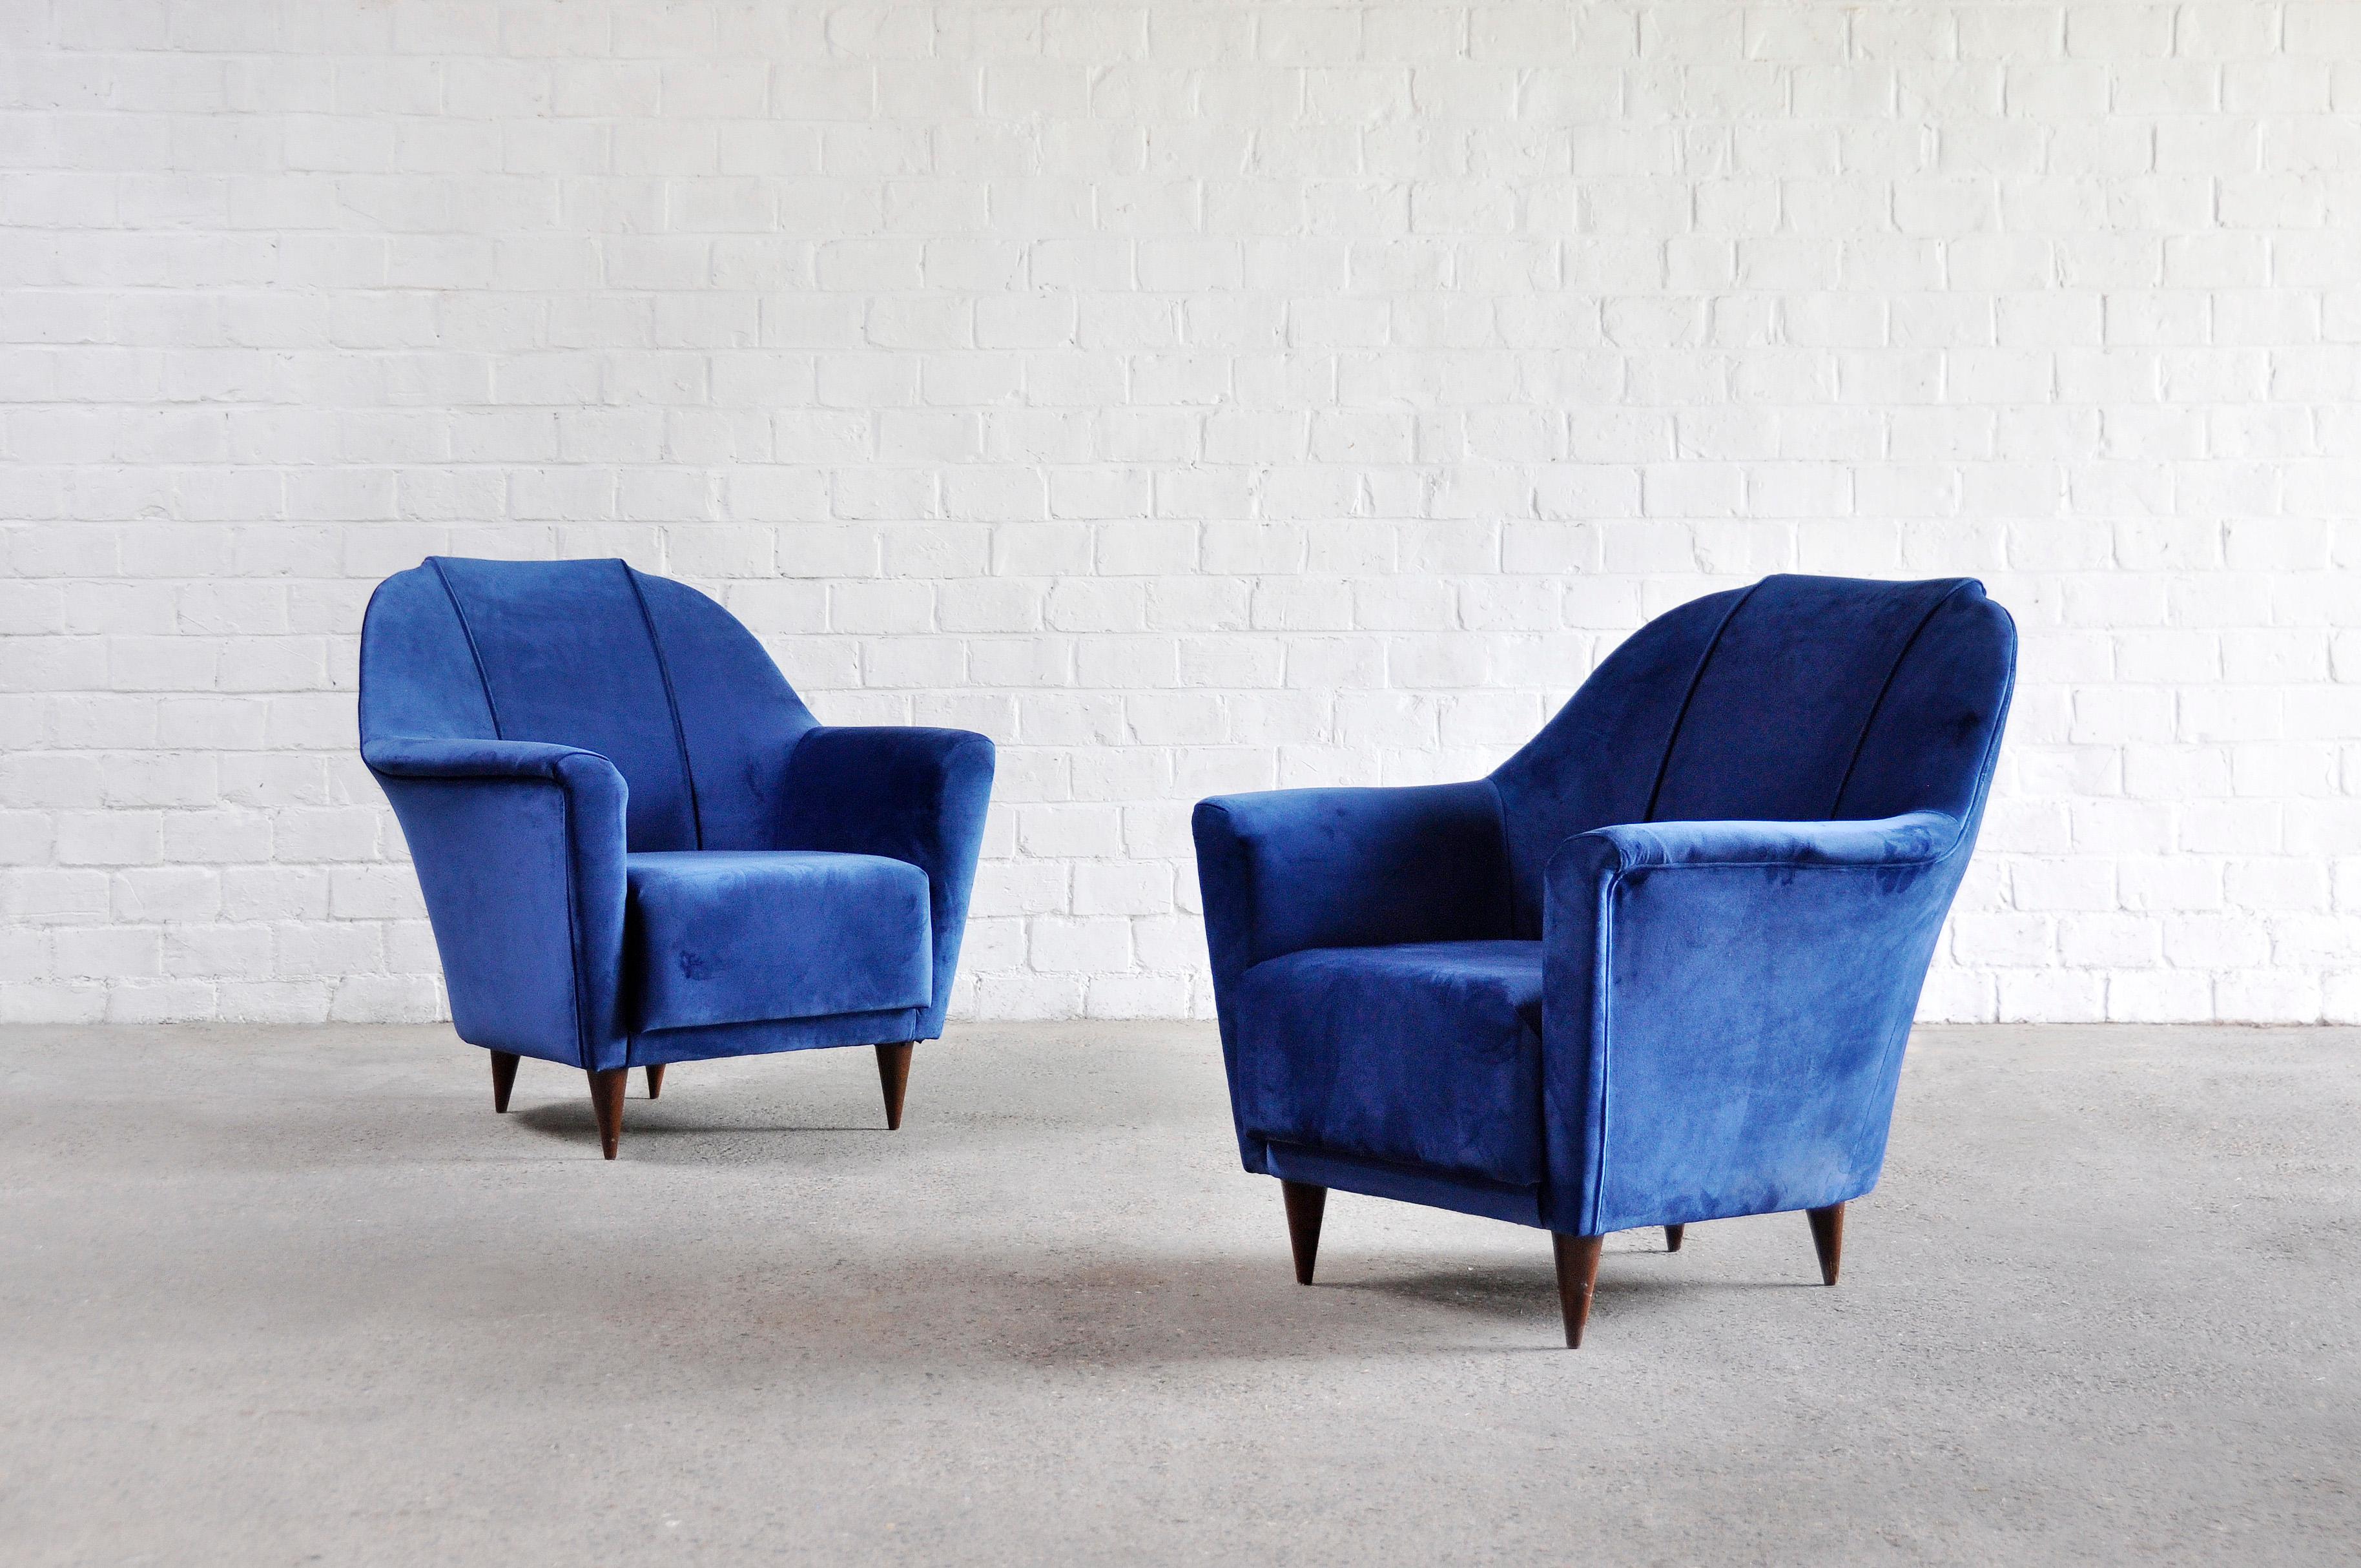 A pair of mid-century armchairs by Ico Parisi for Ariberto Colombo Cantu, designed in the 1950s. The pronounced curves and lines combined with the luxurious velvet fabric give these chairs a very chic and elegant feel. The seats feature a